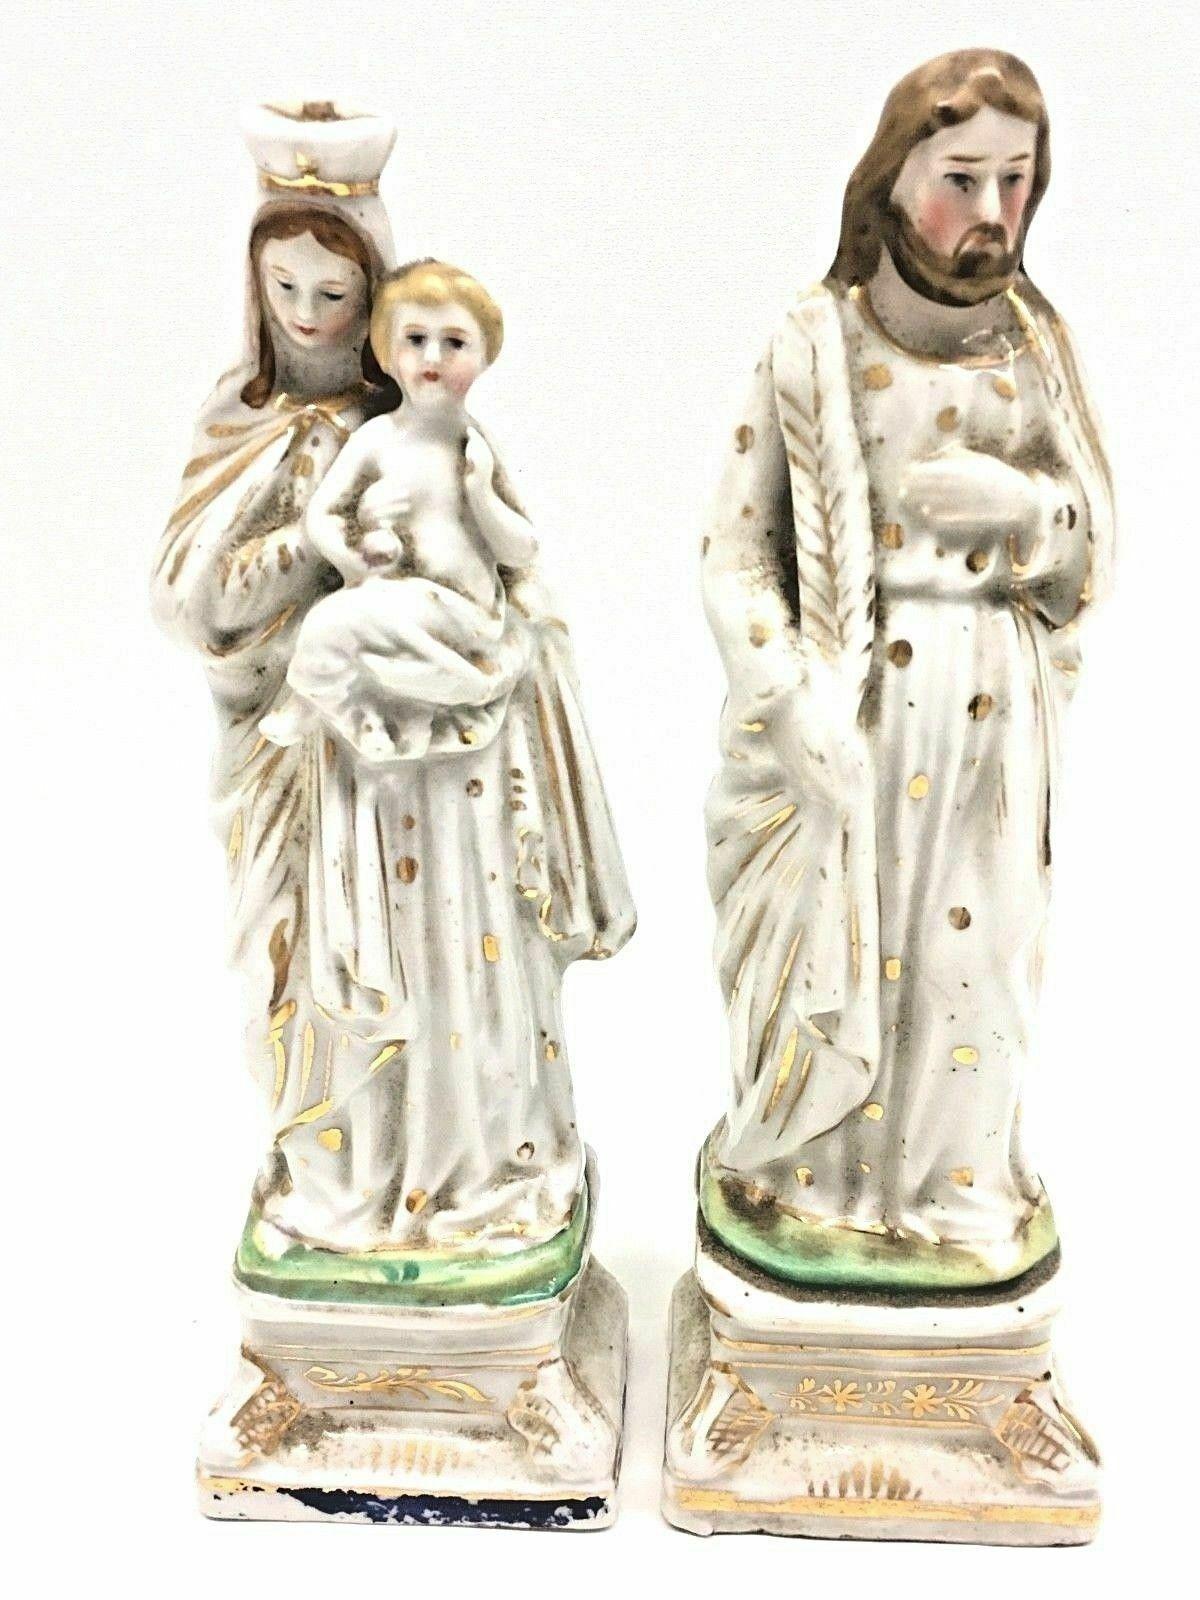 Beautiful porcelain statues or figures handmade in Germany, circa 1860s. A beautiful piece for any room. Measurements given for the Jesus statue. Statues are in the as found condition, with use and dust, but this is old-age.